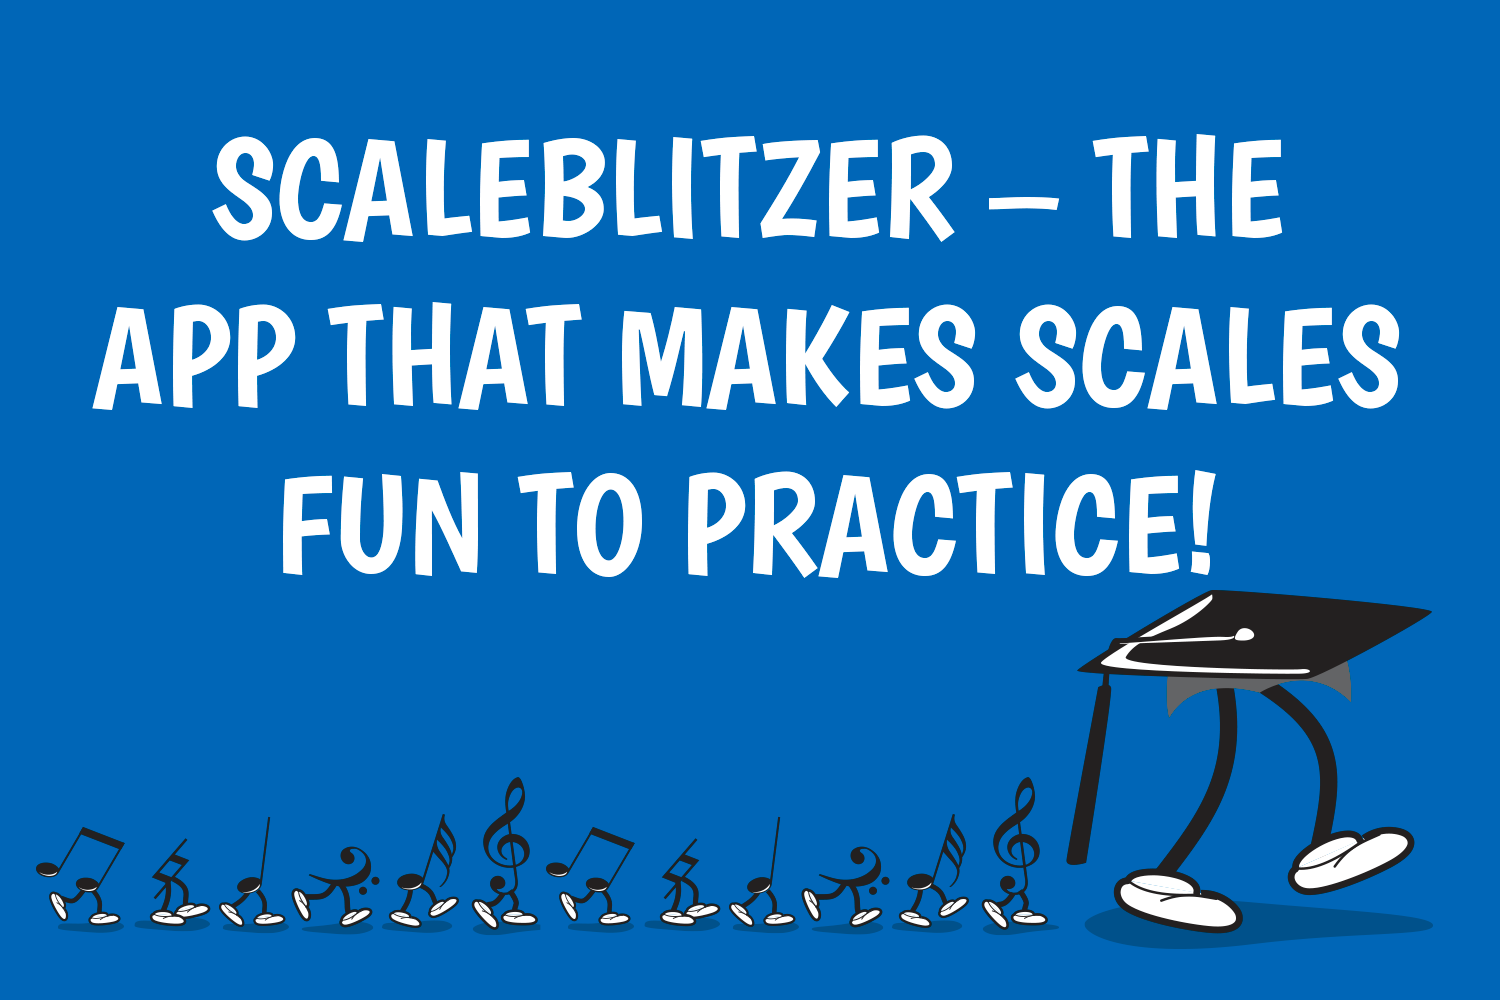 ScaleBlitzer - The App that Makes Scales FUN to Practice!